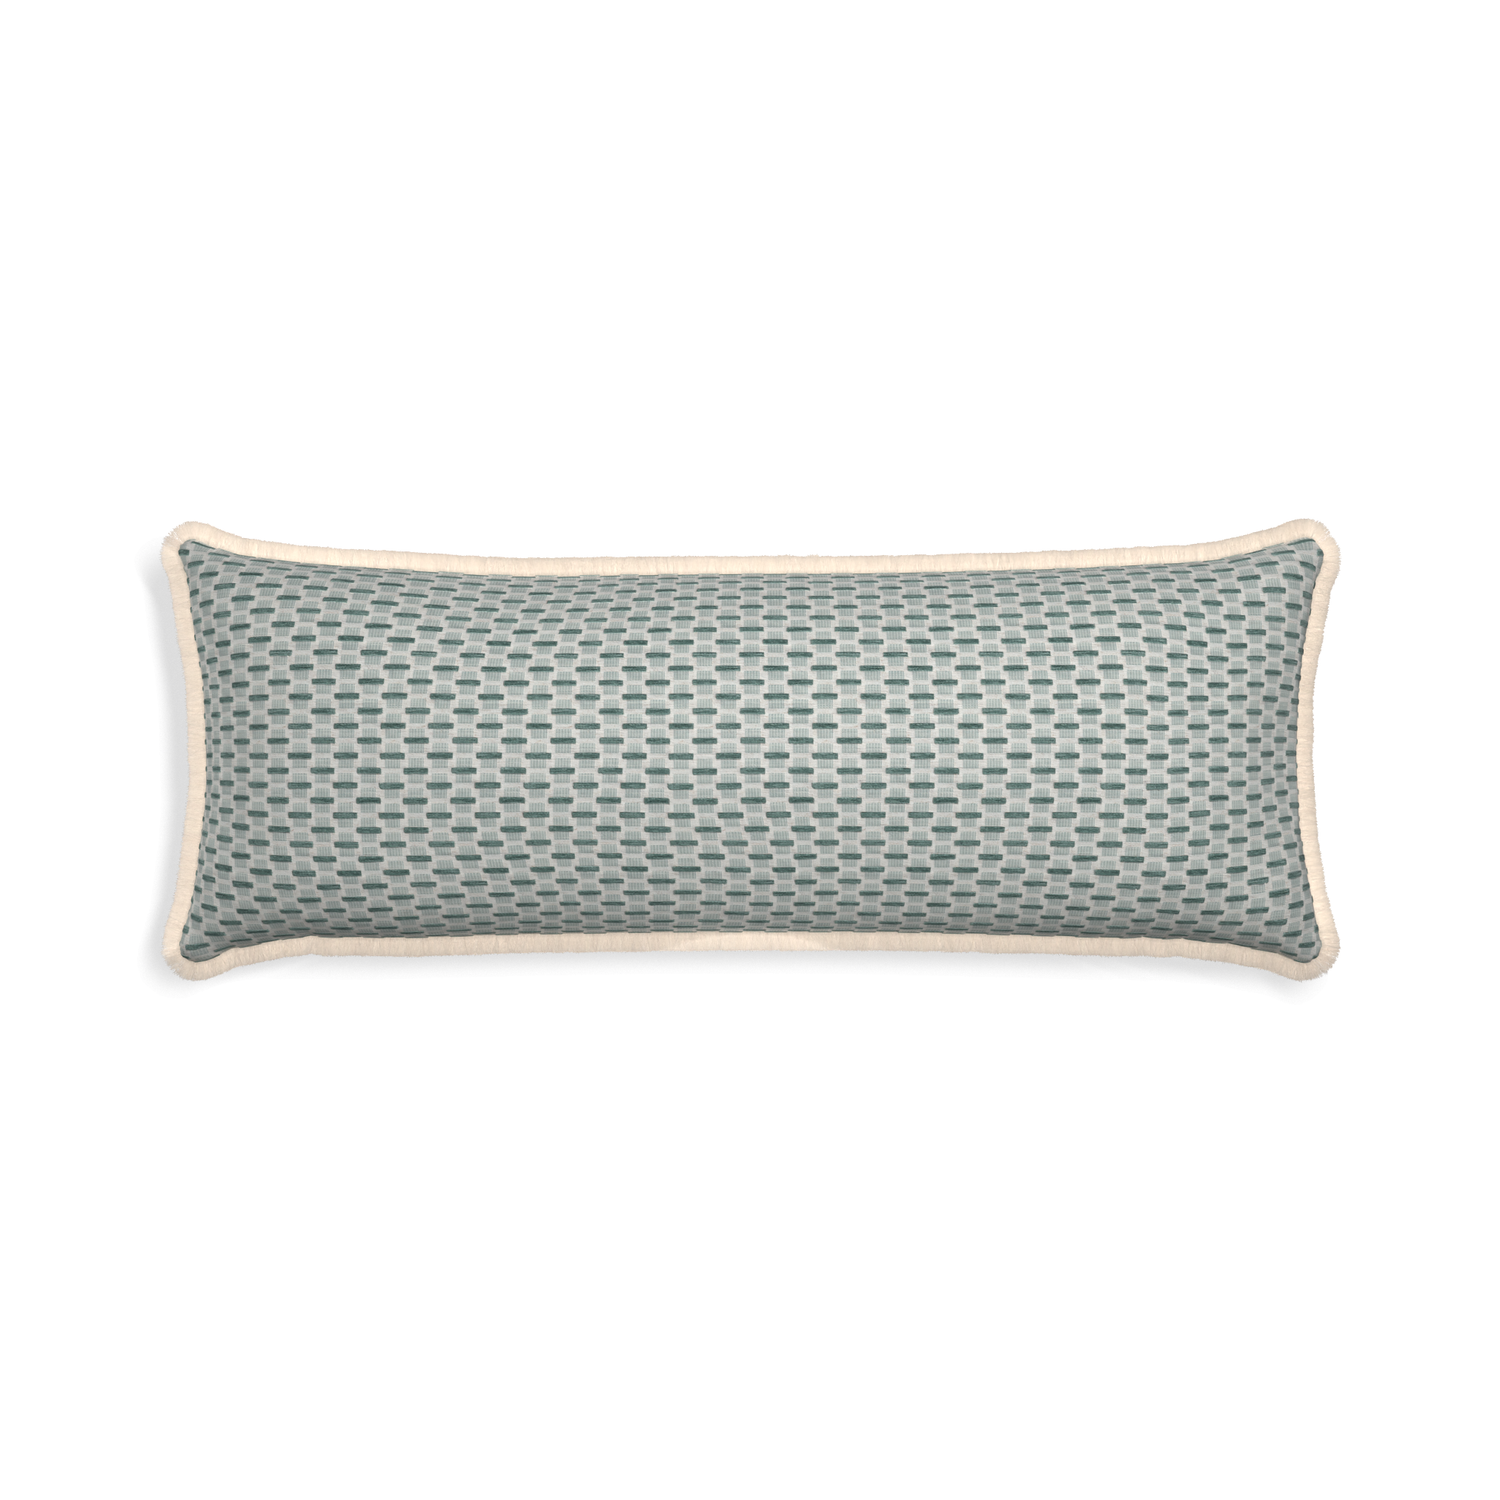 Xl-lumbar willow mint custom green geometric chenillepillow with cream fringe on white background